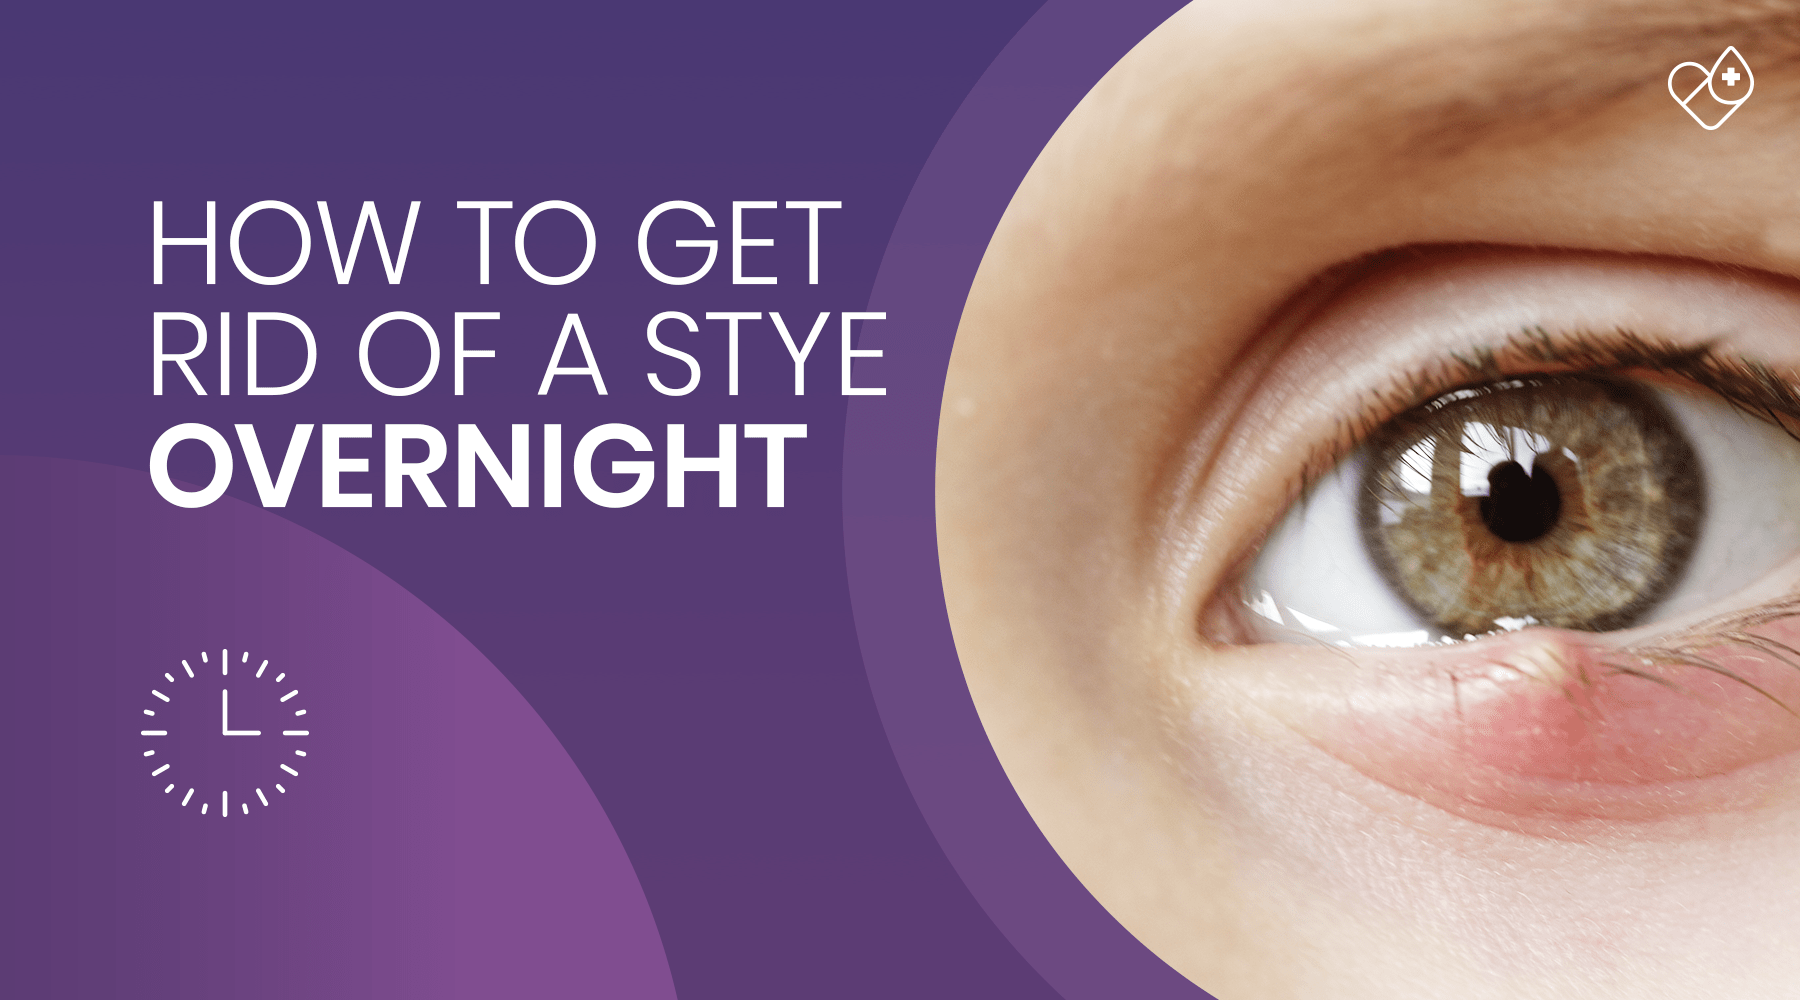 How to get rid of a stye overnight - Dryeye Rescue